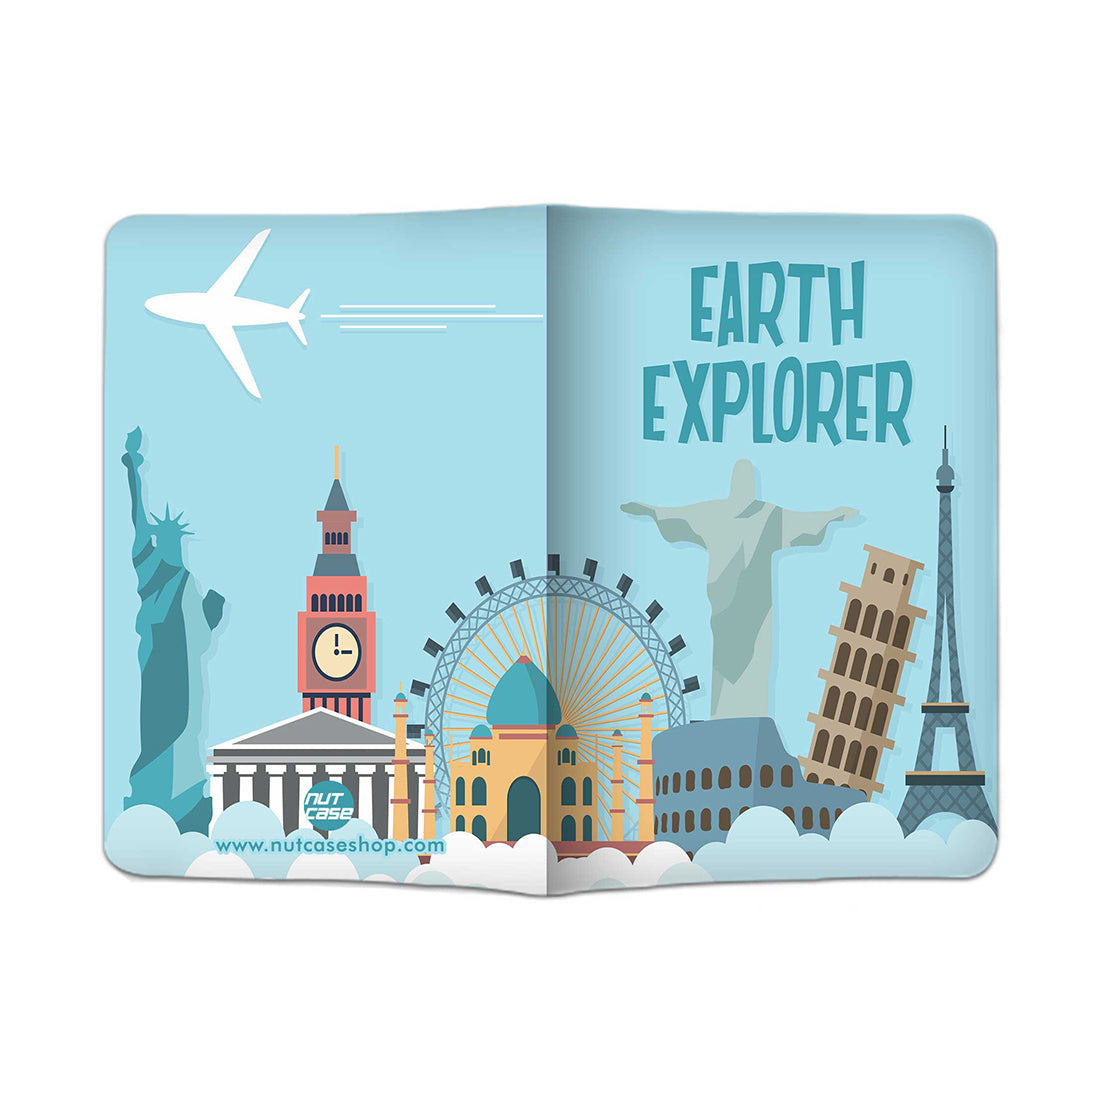 Passport Holder for Men Travel Case with Single Luggage Tag - Earth Explorer